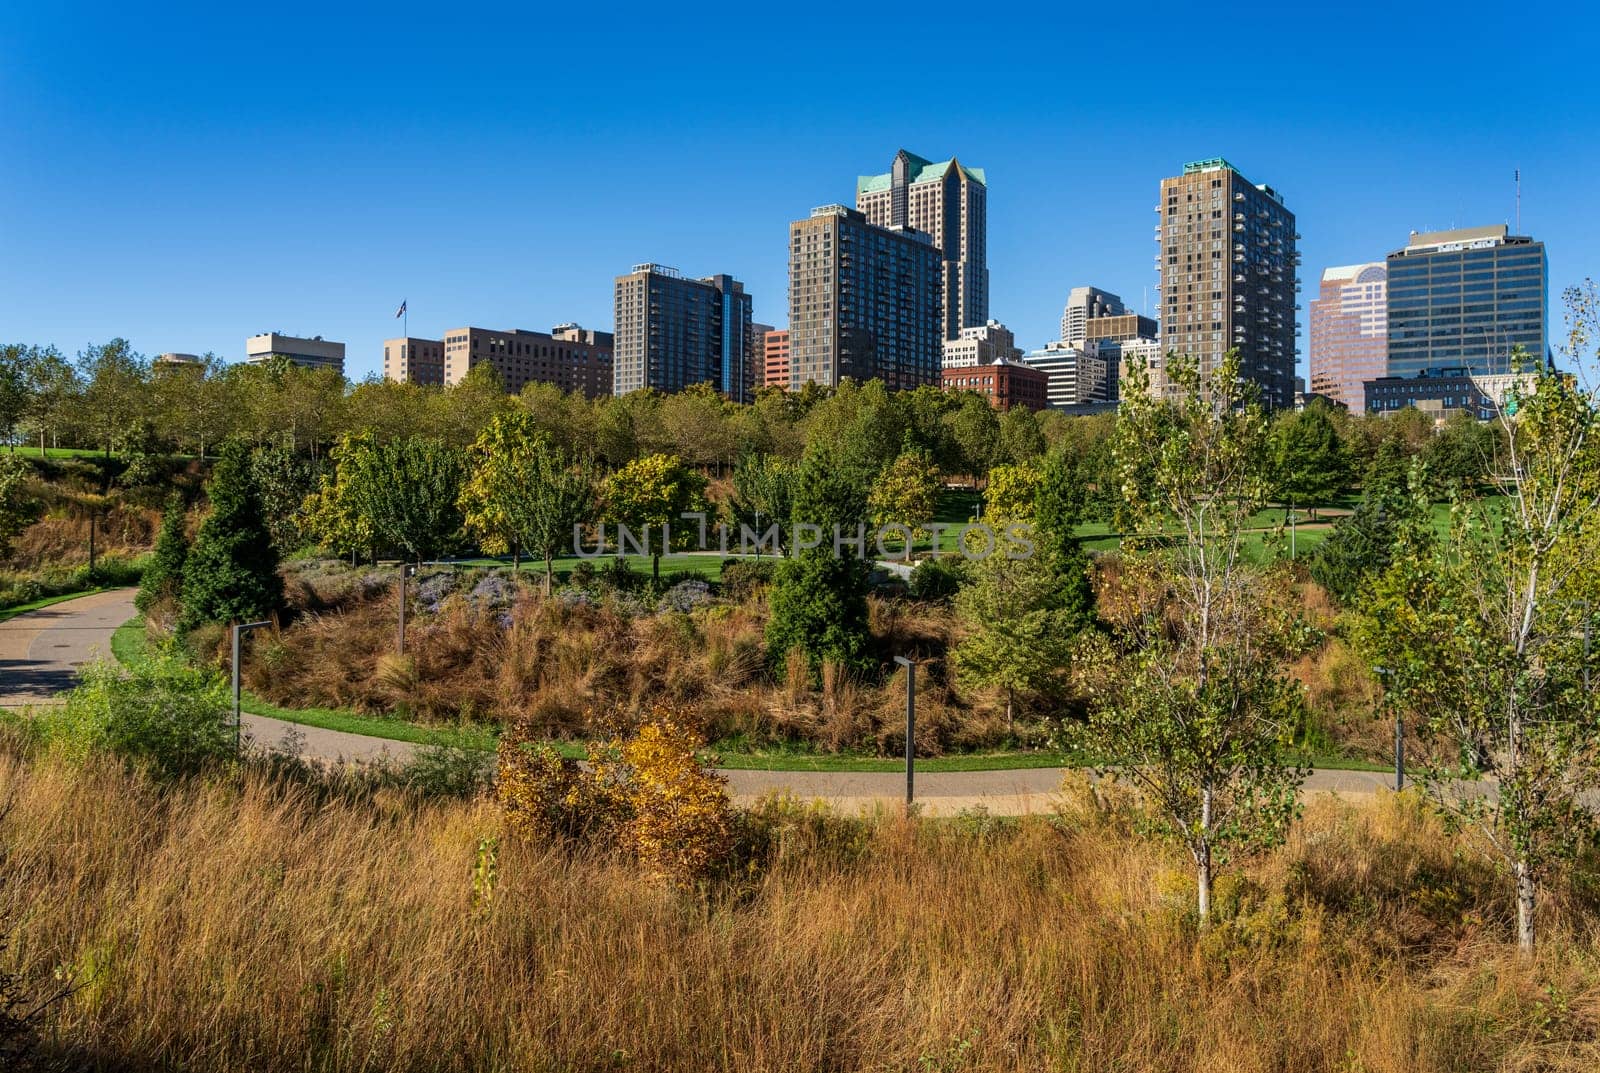 Offices and cityscape of St Louis Missouri seen from Explorers Park by steheap